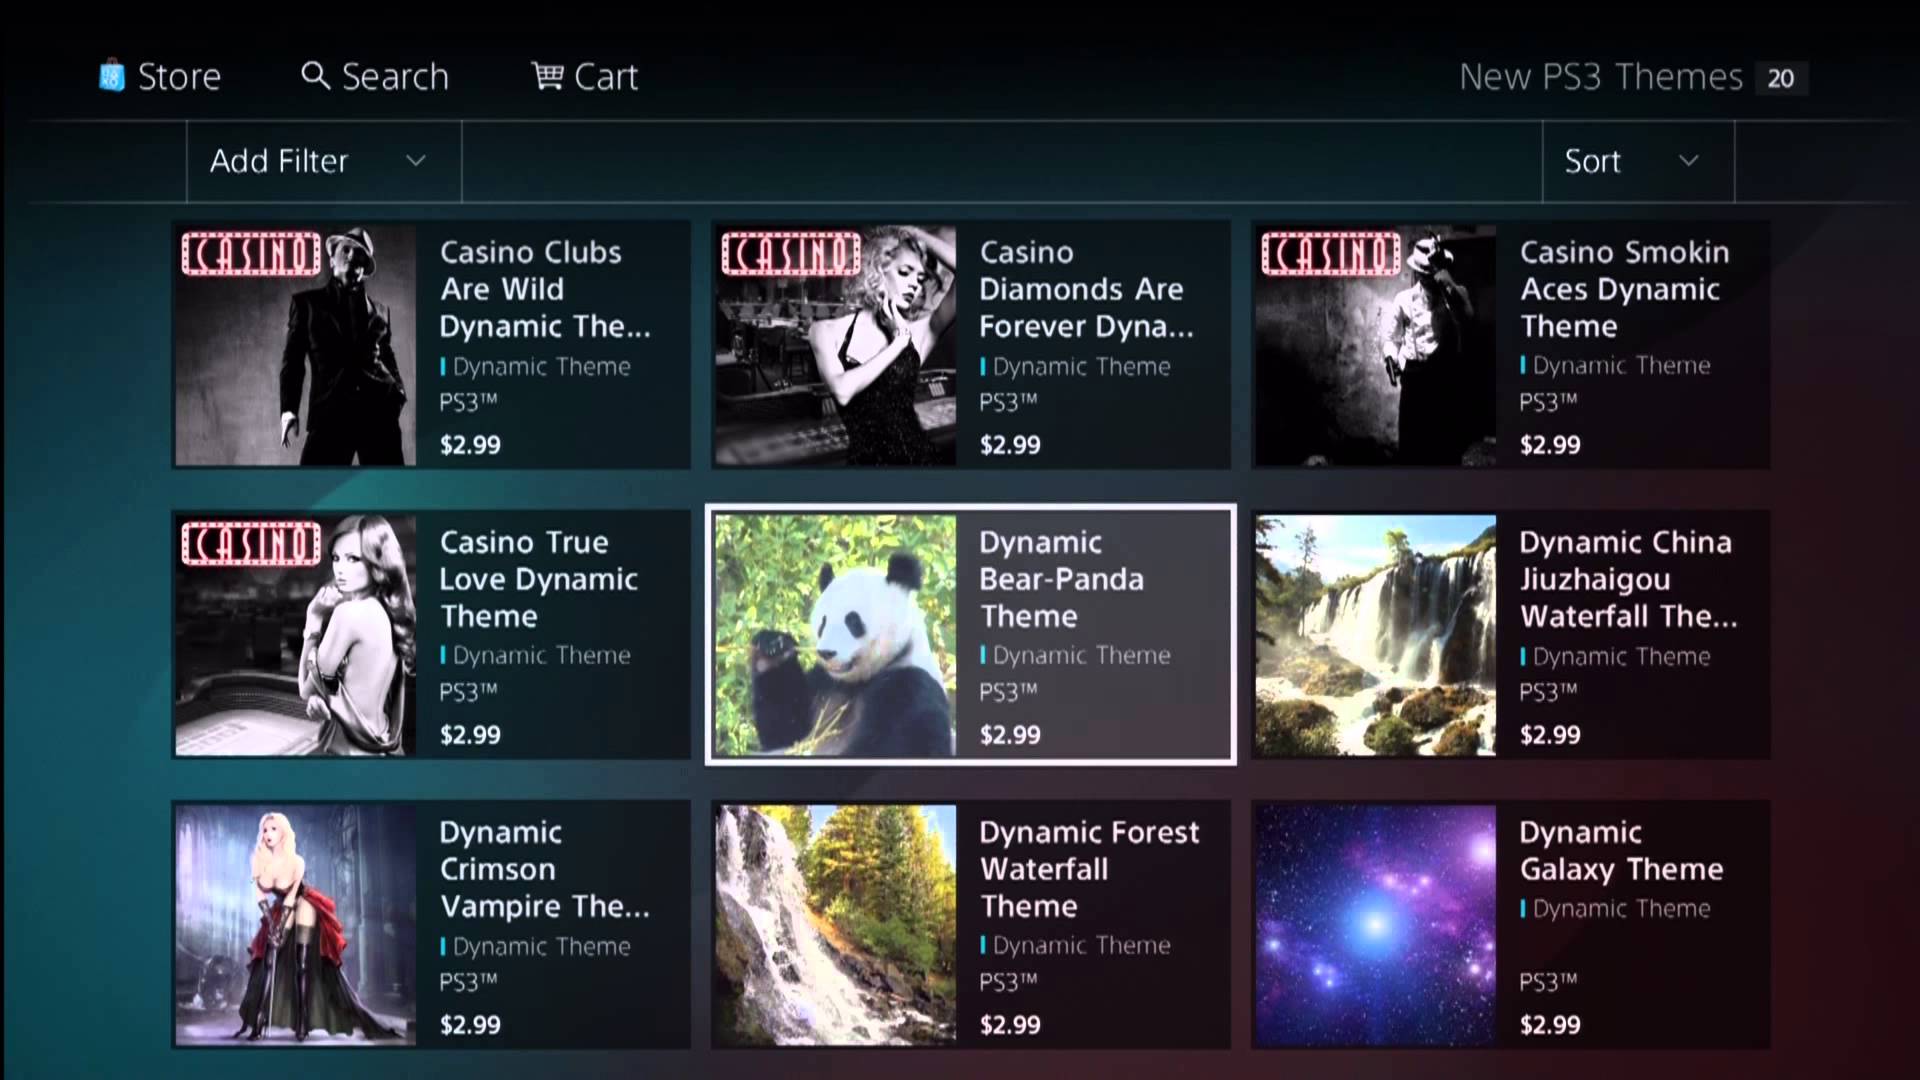 New Playstation Store Layout. Themes, Avatars, Games, Movies